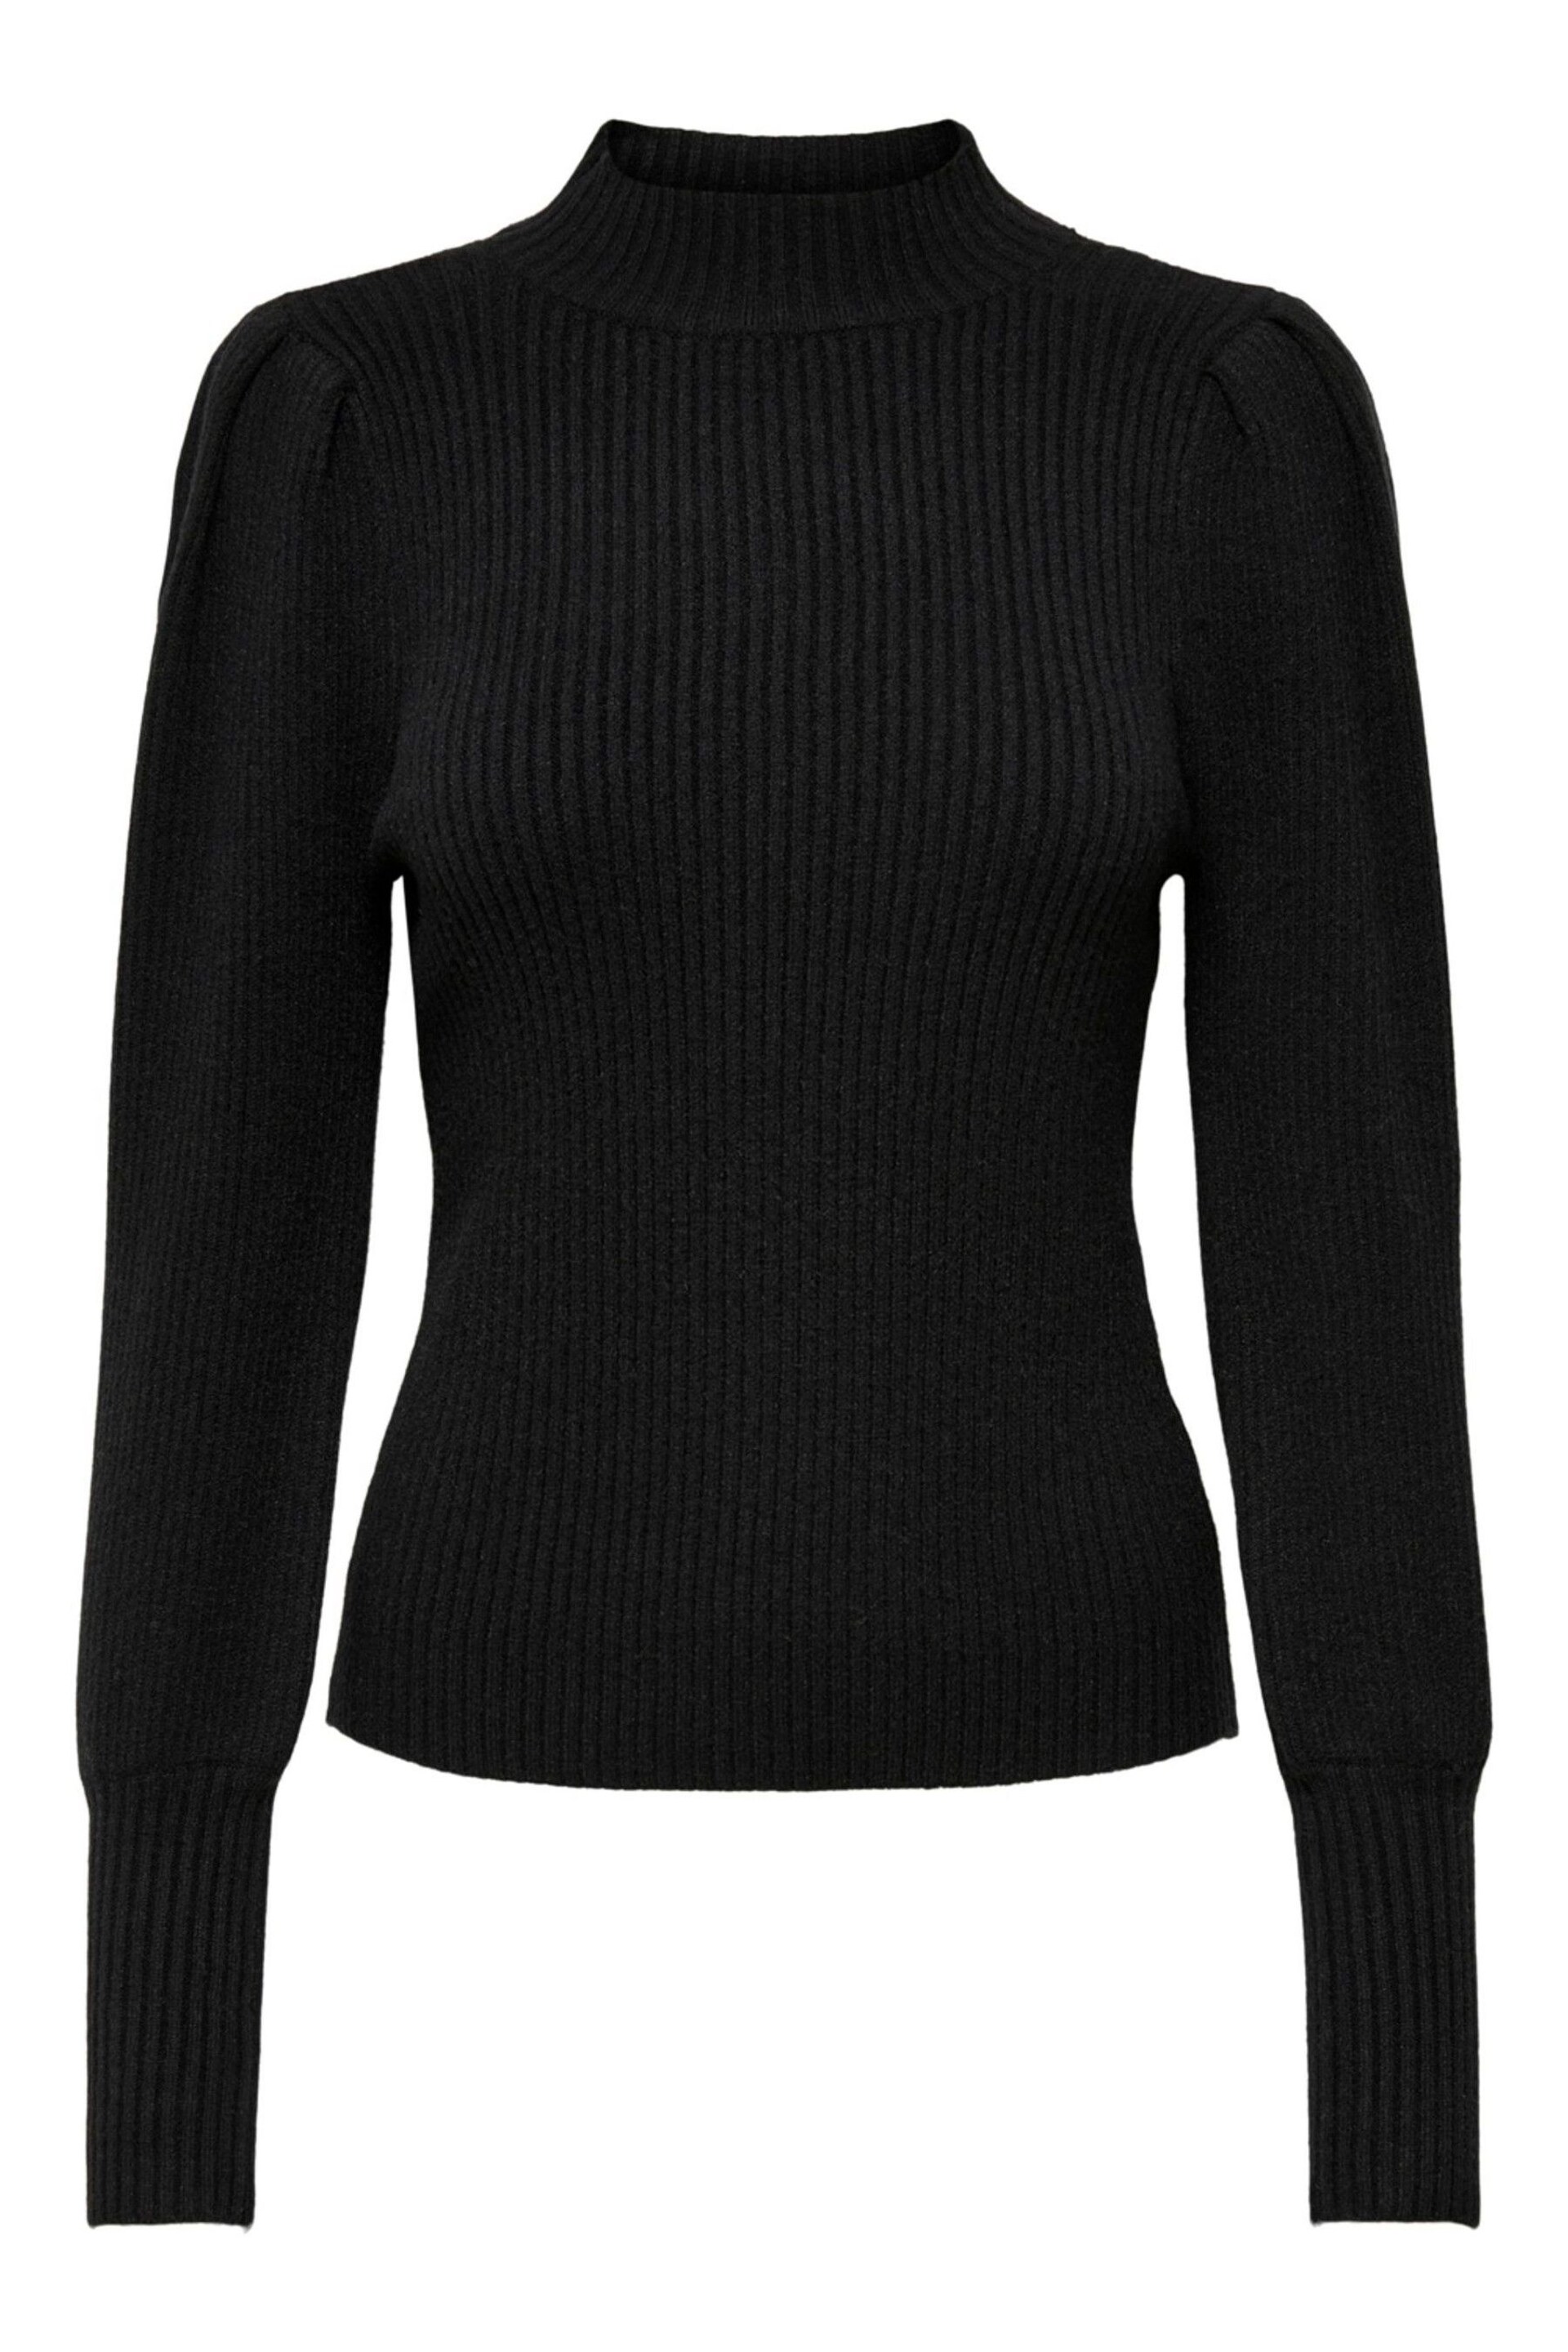 ONLY Black Puff Sleeve Knitted Jumper - Image 5 of 5